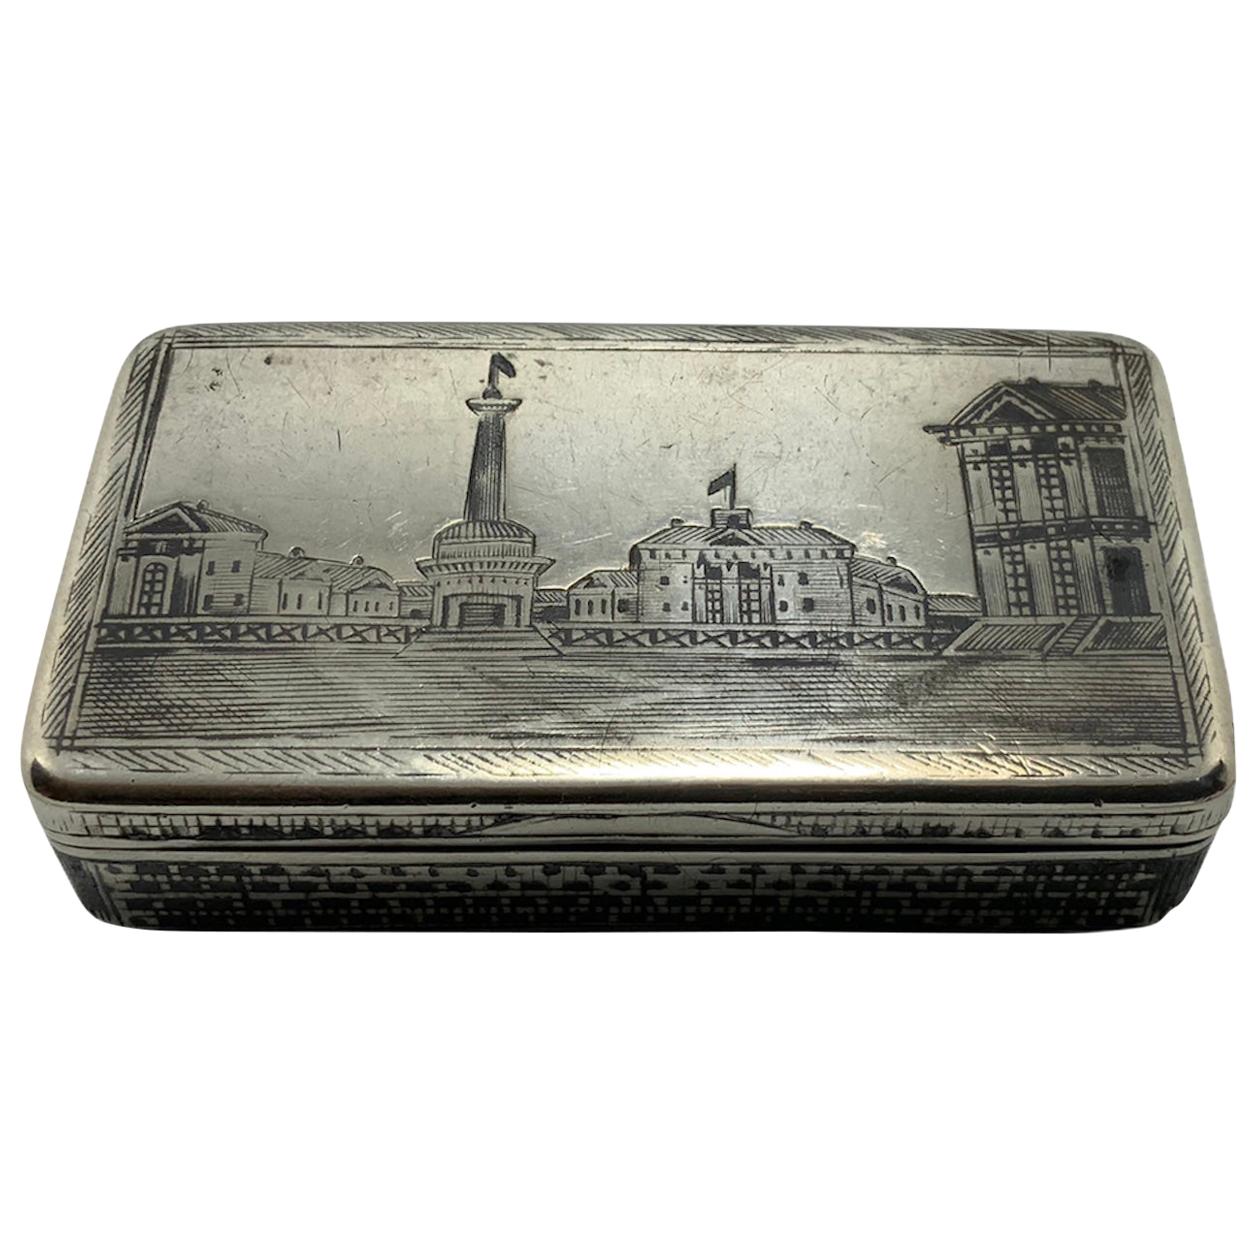 Details about   Vintage powder box enamel silvered holder Compact puff USSR antique Russian box 